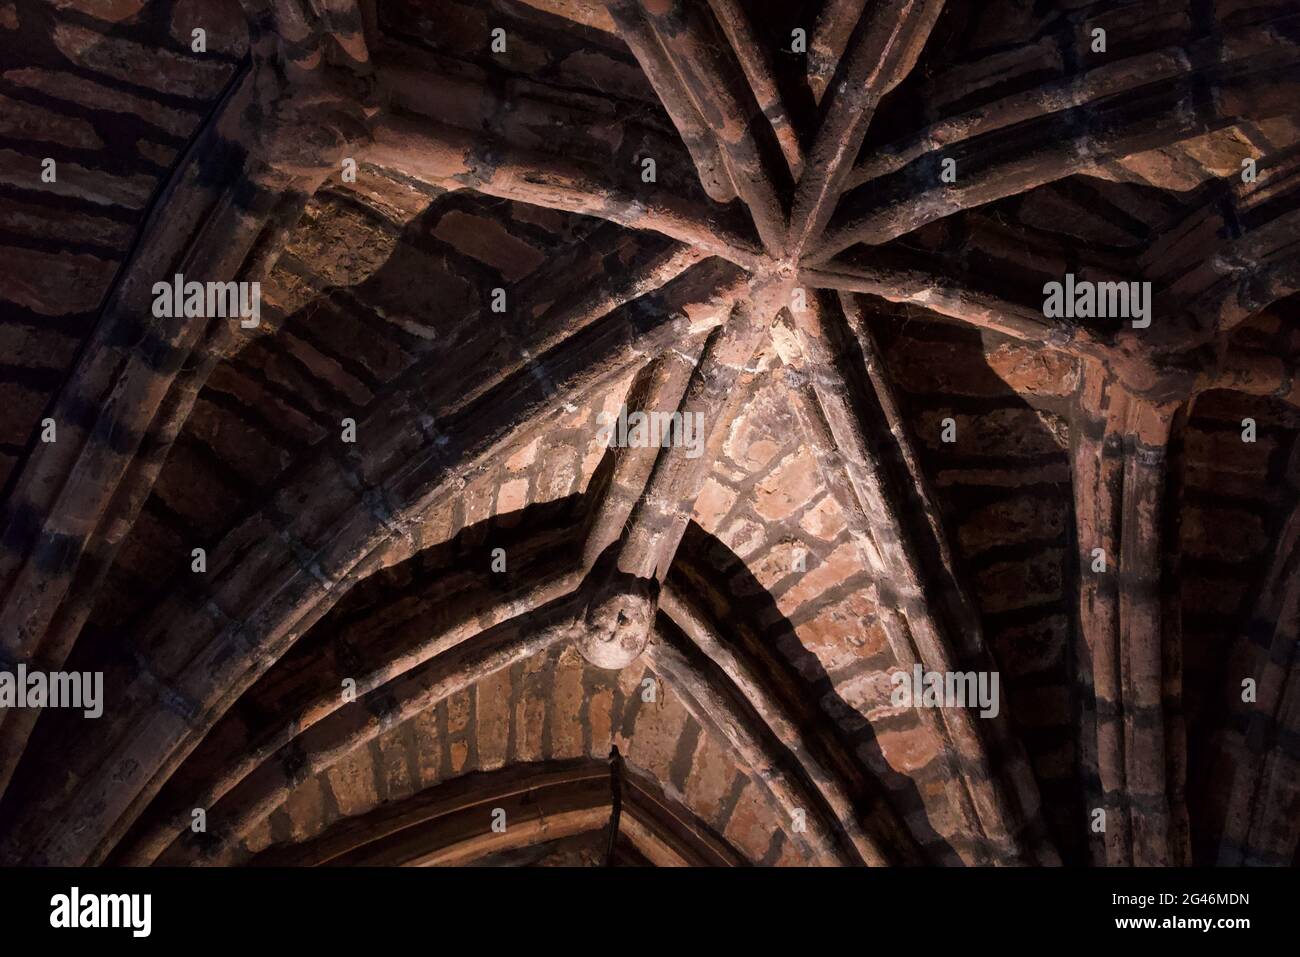 10 June 2021 - Chester UK: Interior of Chester Cathedral showing vaulted ceiling Stock Photo